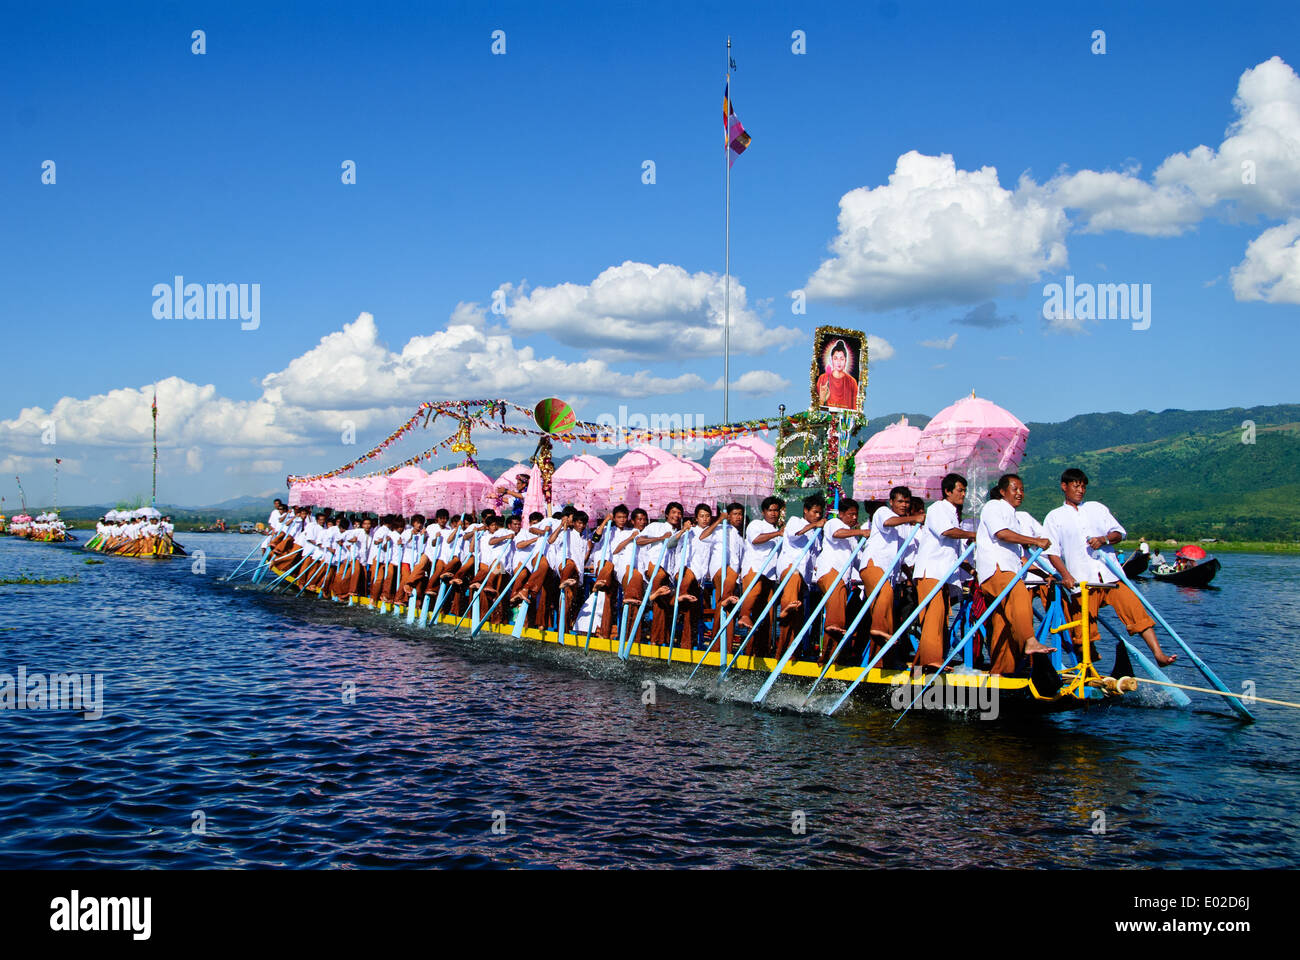 Leg-rowers moving forwards pulling the royal barge across Inle Lake during the festival. Stock Photo